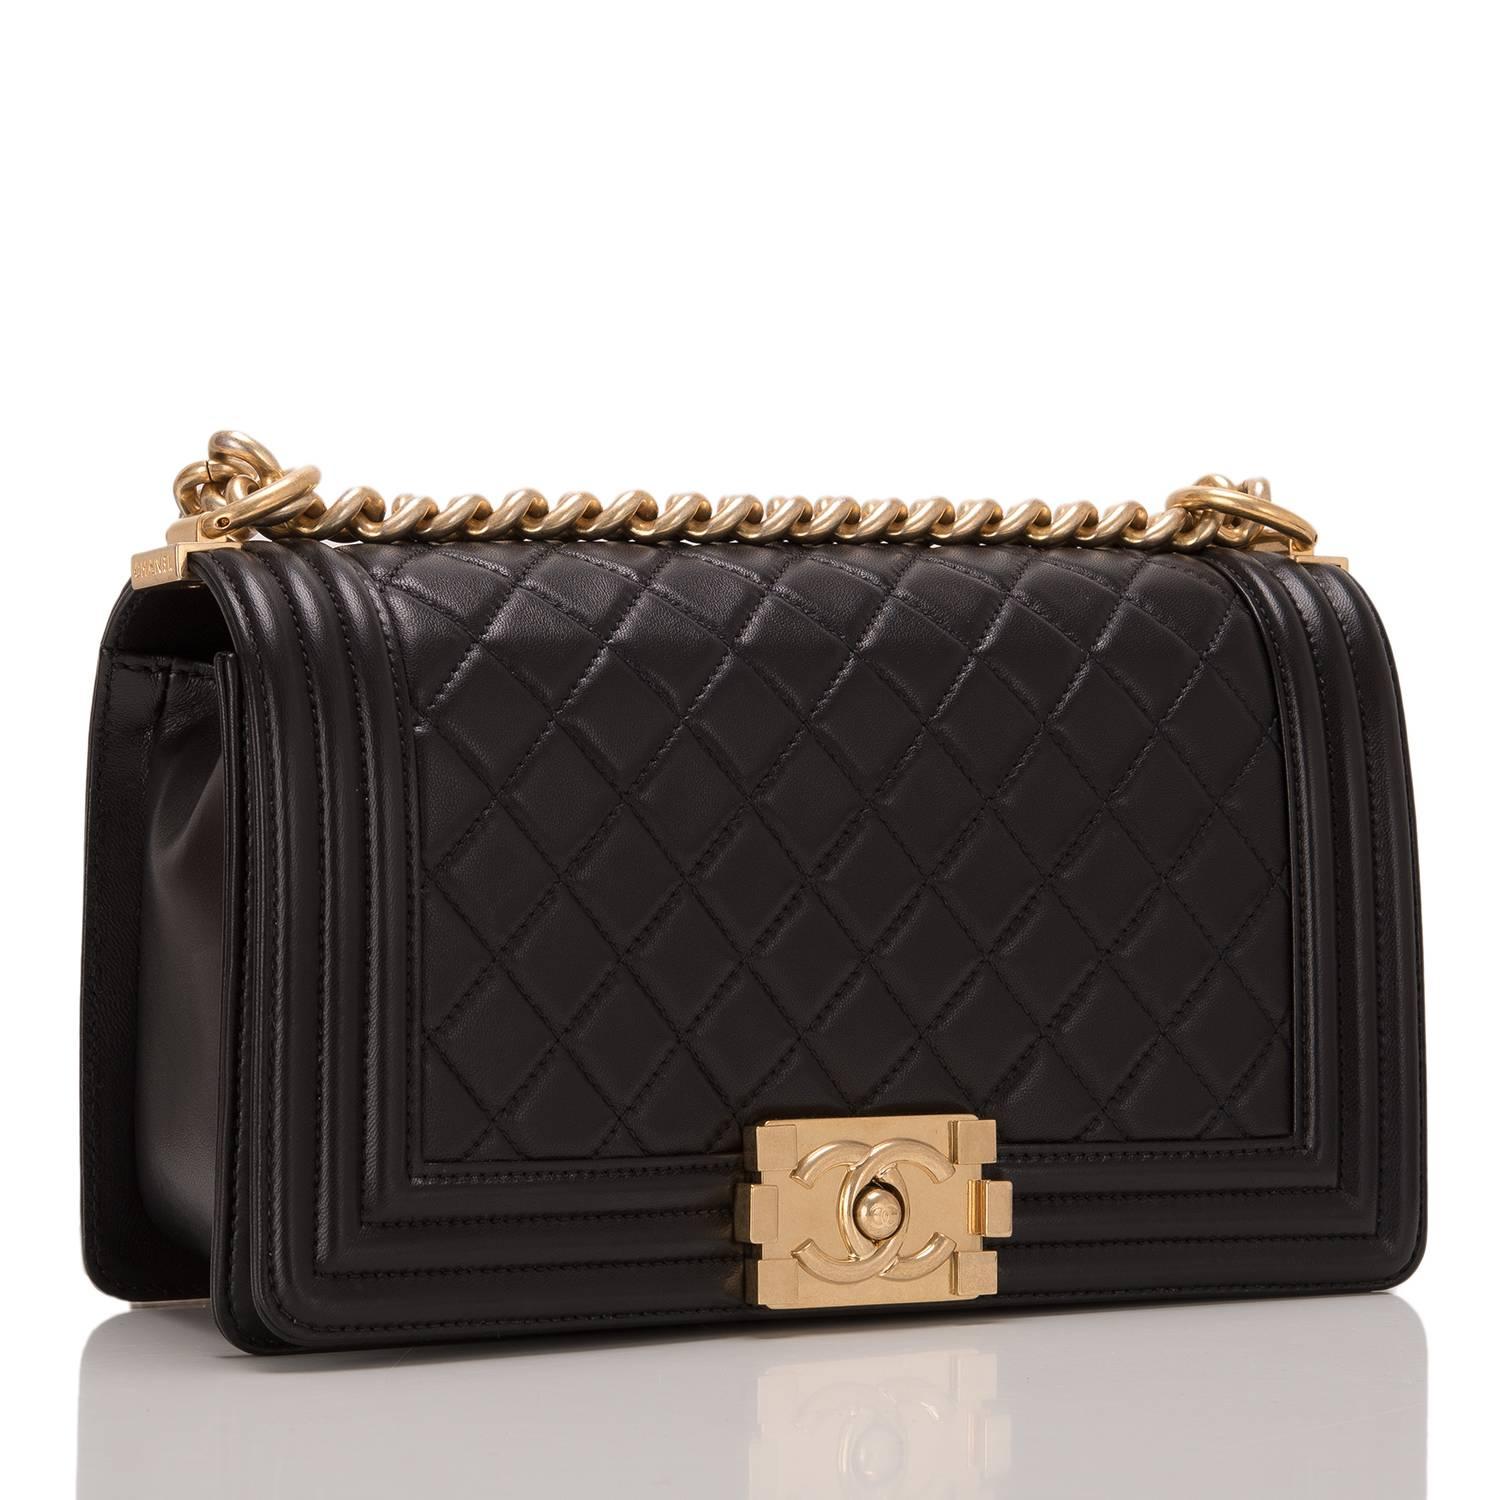  	
Chanel black quilted calfskin Medium Boy Bag with antique gold hardware.

This bag features a full front flap with Le Boy Chanel signature CC push lock closure and antique gold chain link and black leather padded shoulder/crossbody